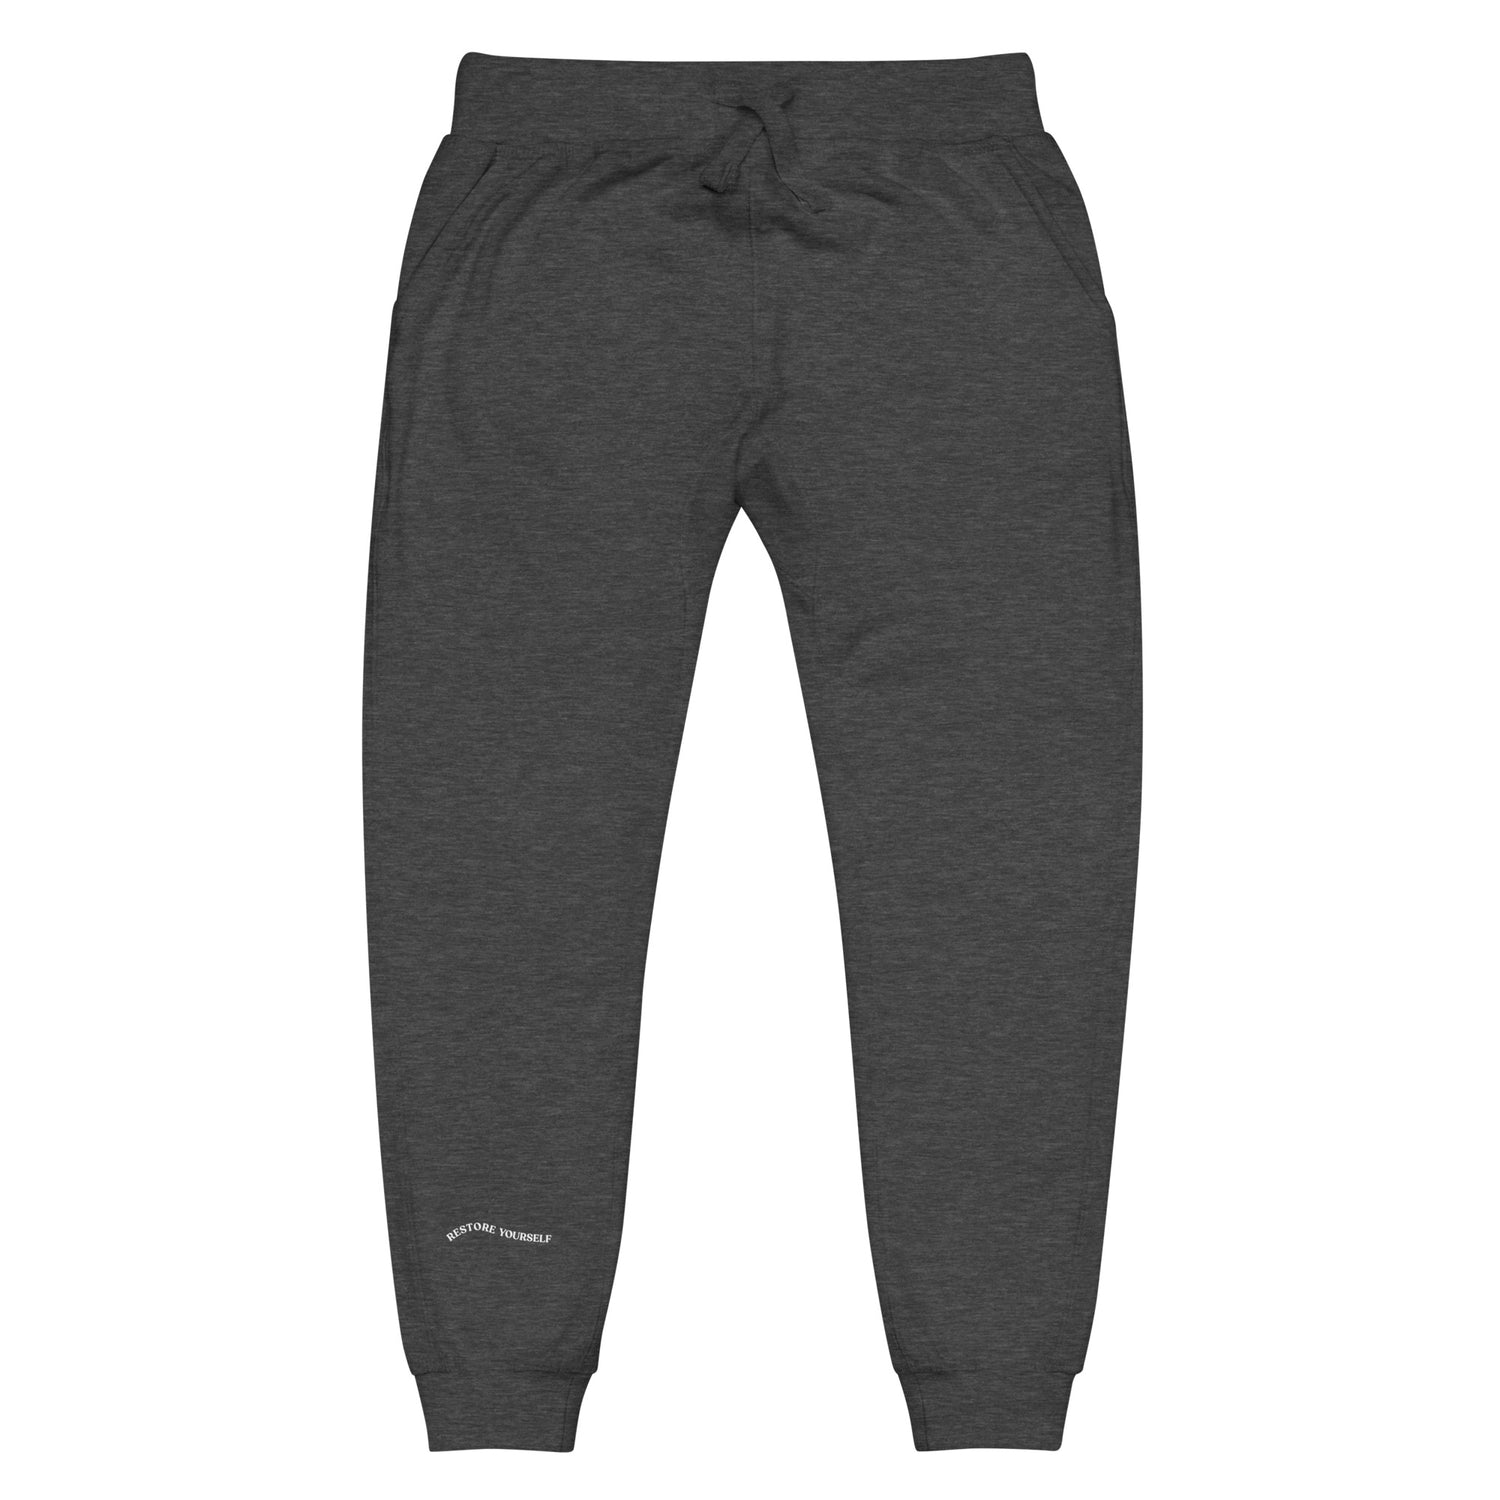 Charcoal sweat pant helps mental health with "Restore Yourself".